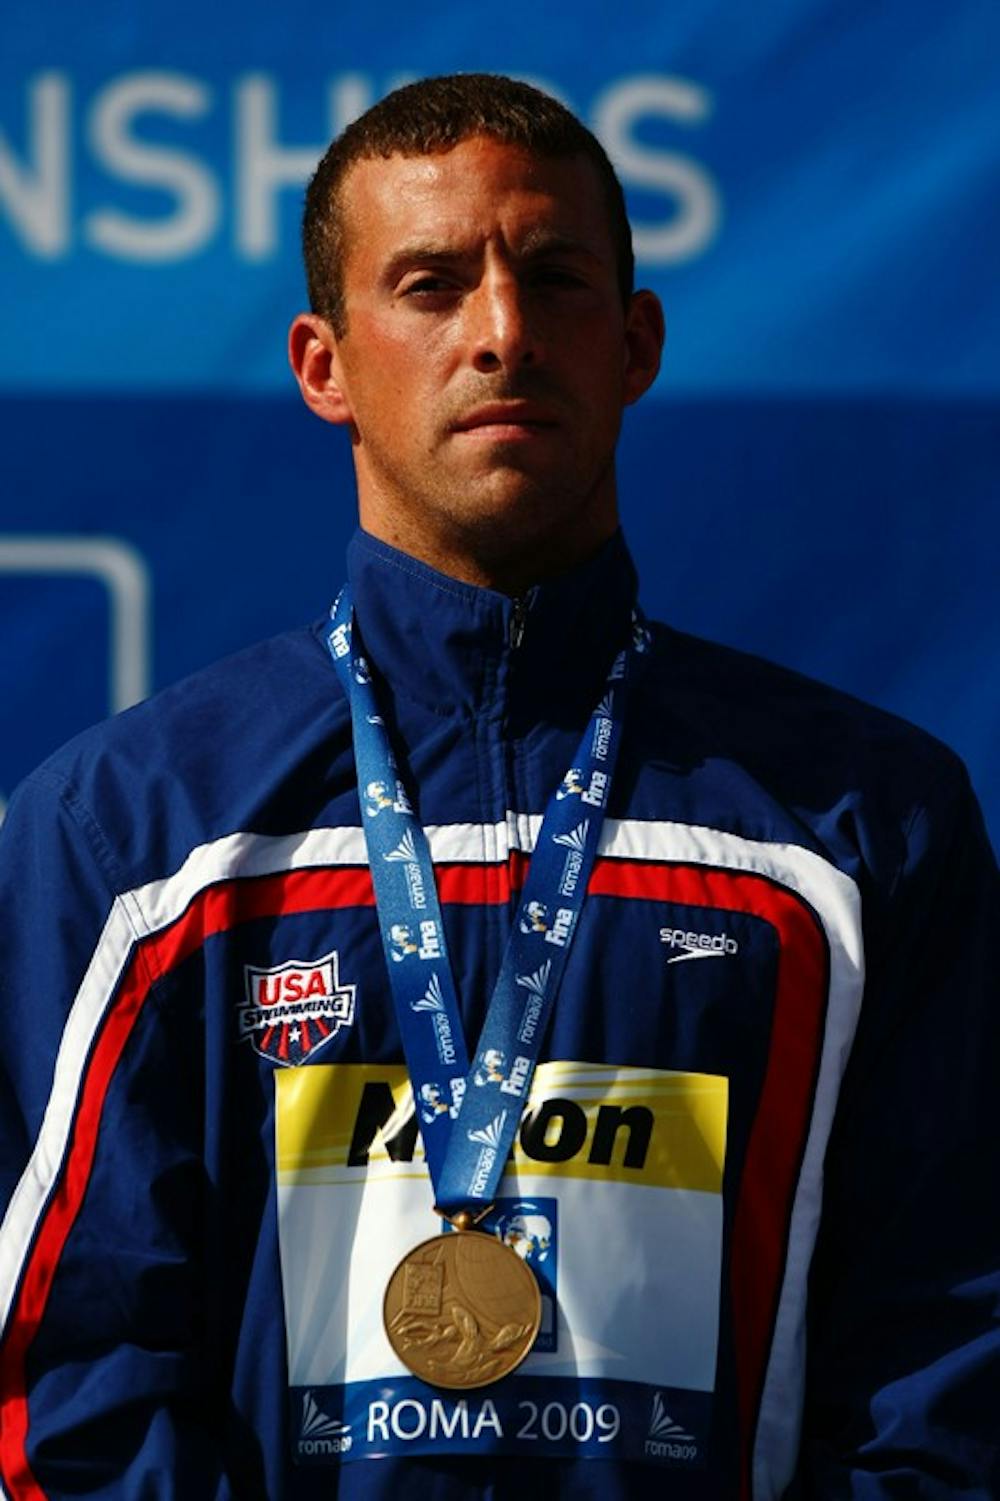 ROME - JULY 24:  Francis Crippen of USA receives his Bronze medal for the 10 km Men's Open Water Final during the 13th FINA World Championships at the Stadio del Nuoto on July 24, 2009 in Rome, Italy.  (Photo by Lars Baron/Getty Images) *** Local Caption *** Francis Crippen